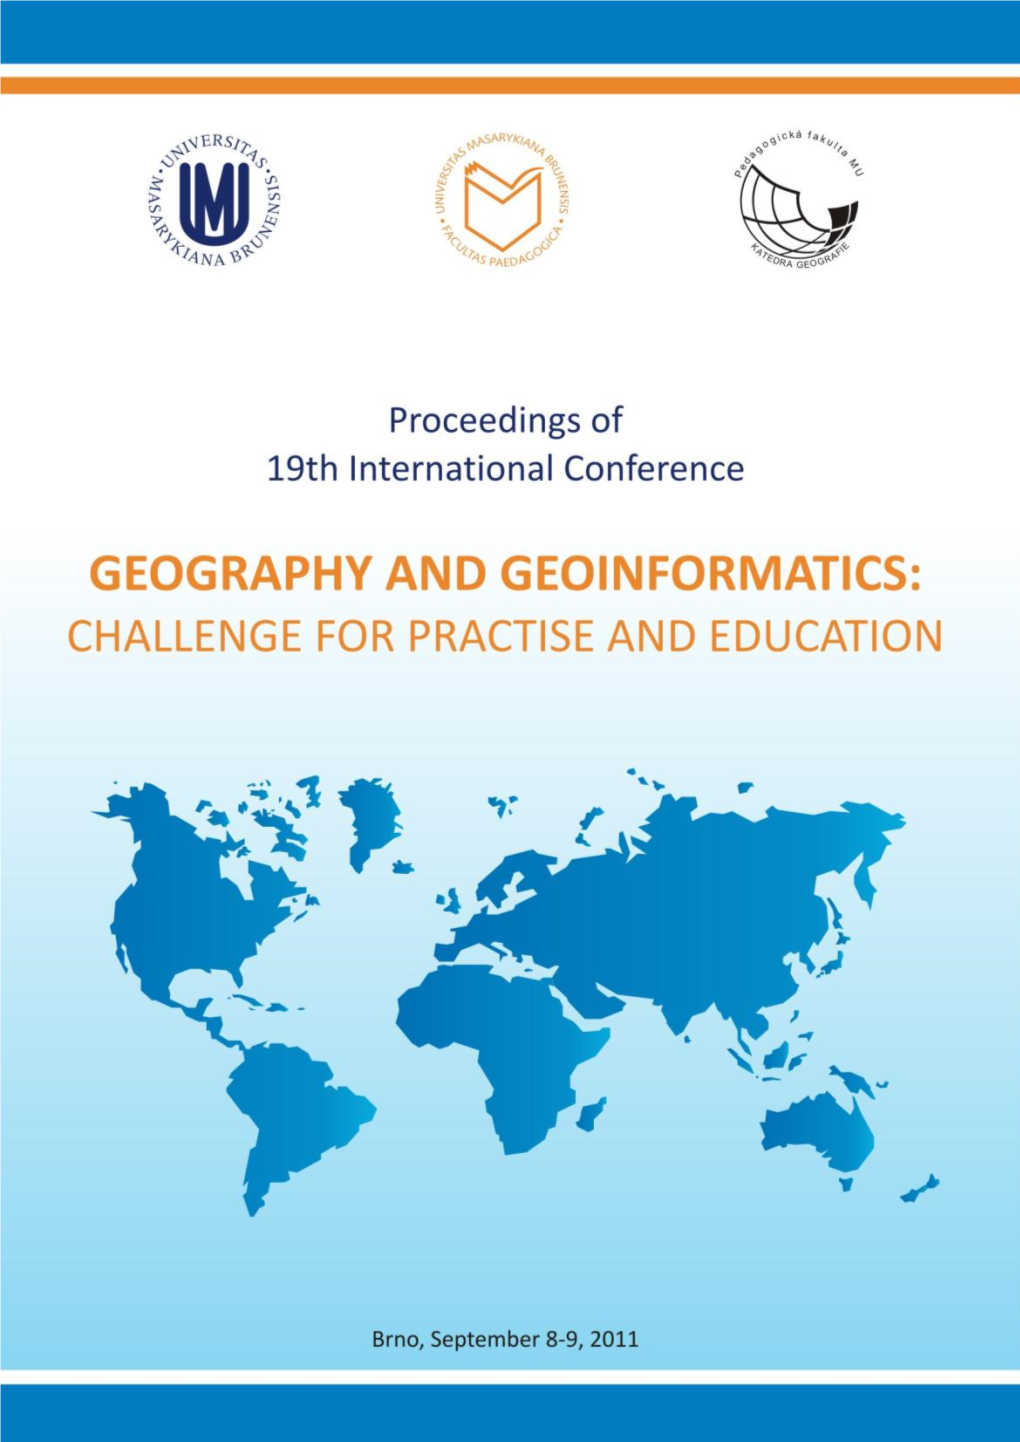 GEOGRAPHY and GEOINFORMATICS: Challenge for Practise and Education